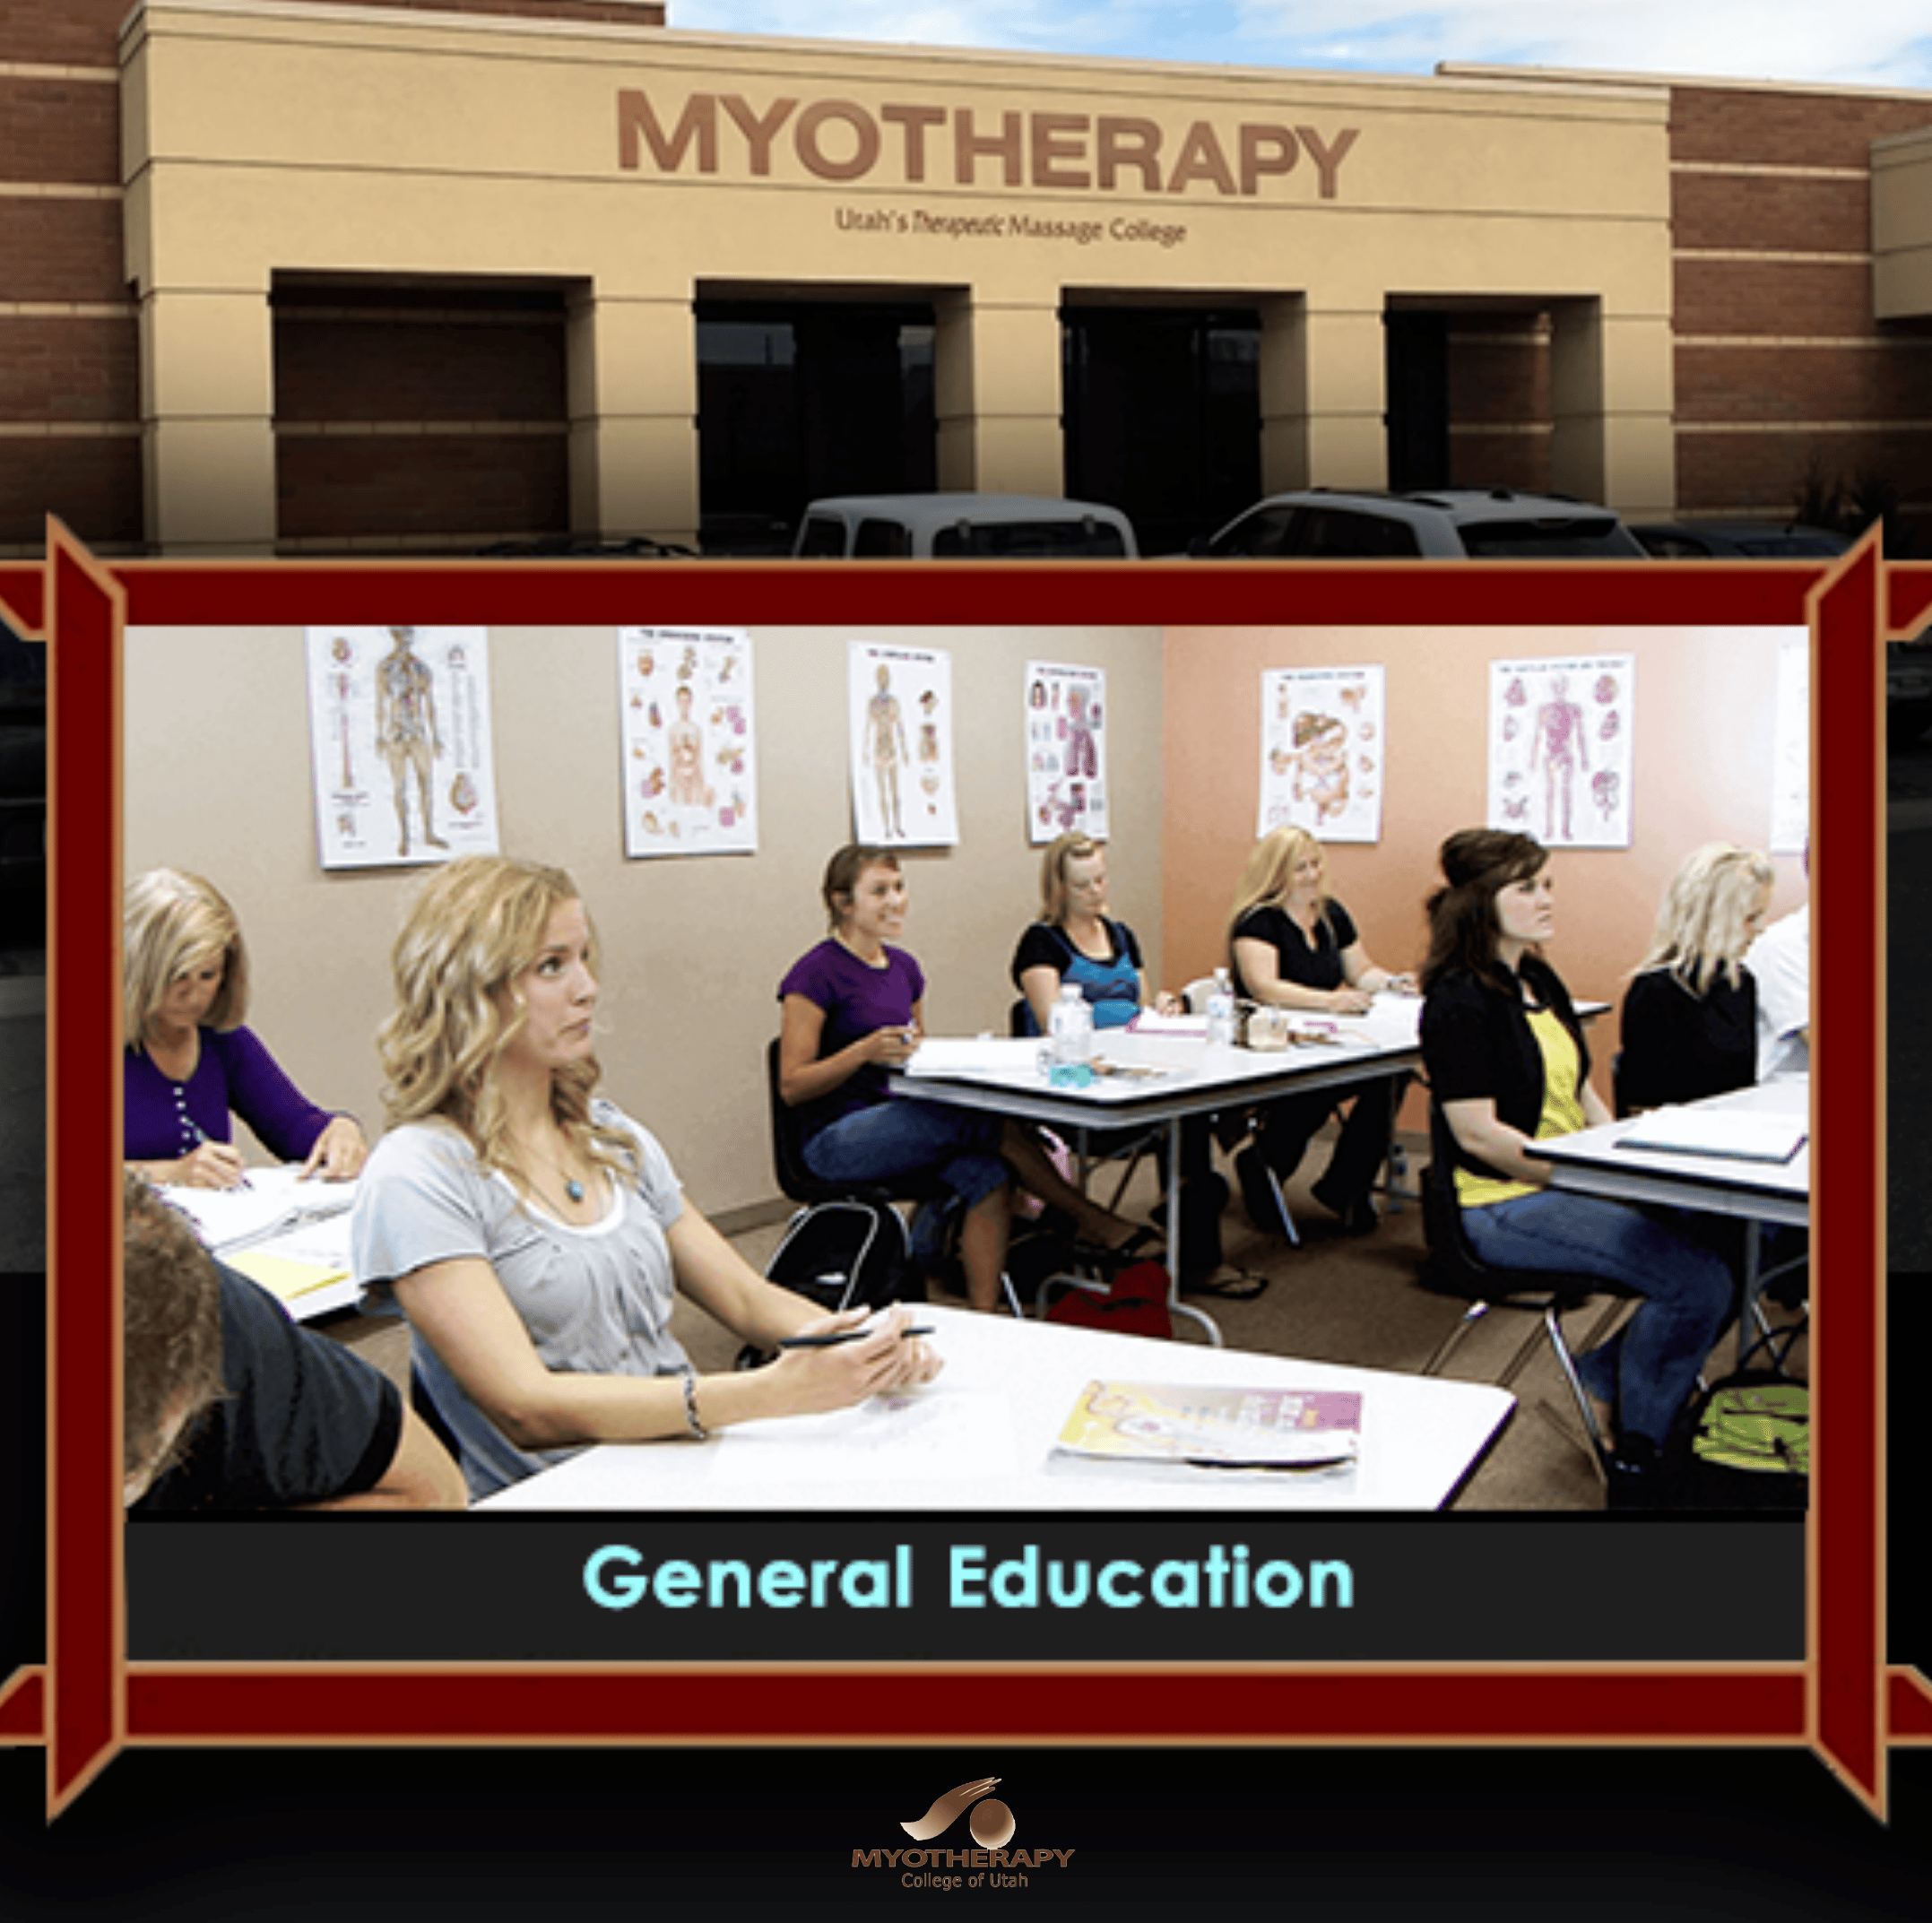 General Education at Myotherapy College of Utah has 5 credits which ...